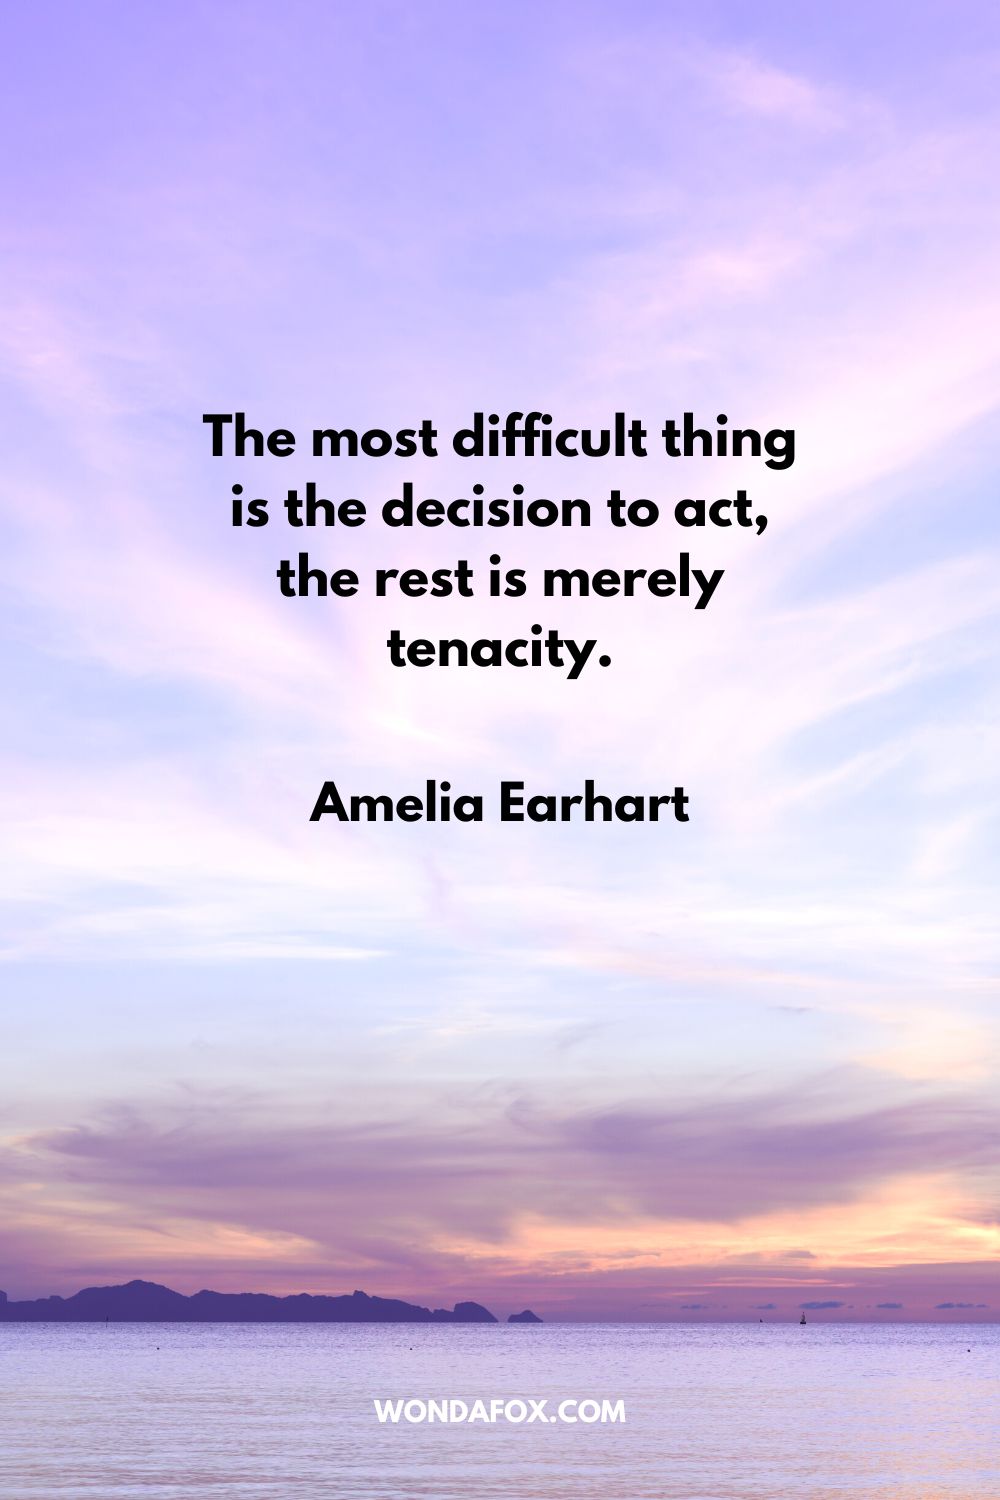 “The most difficult thing is the decision to act, the rest is merely tenacity. Amelia Earhart